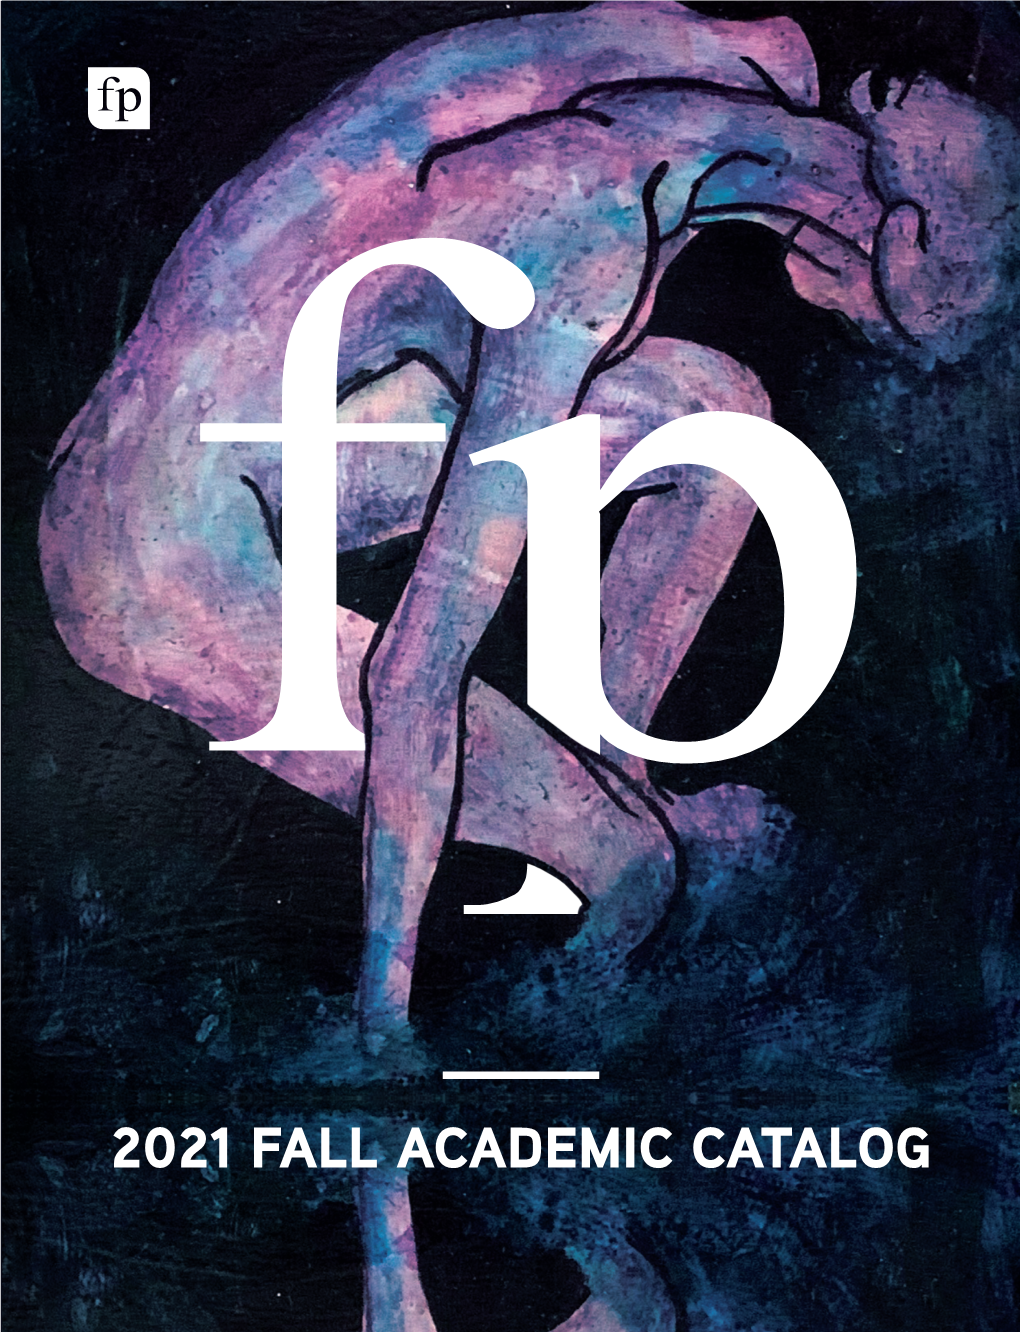 2021 FALL ACADEMIC CATALOG New and Notable Titles for Fall 2021